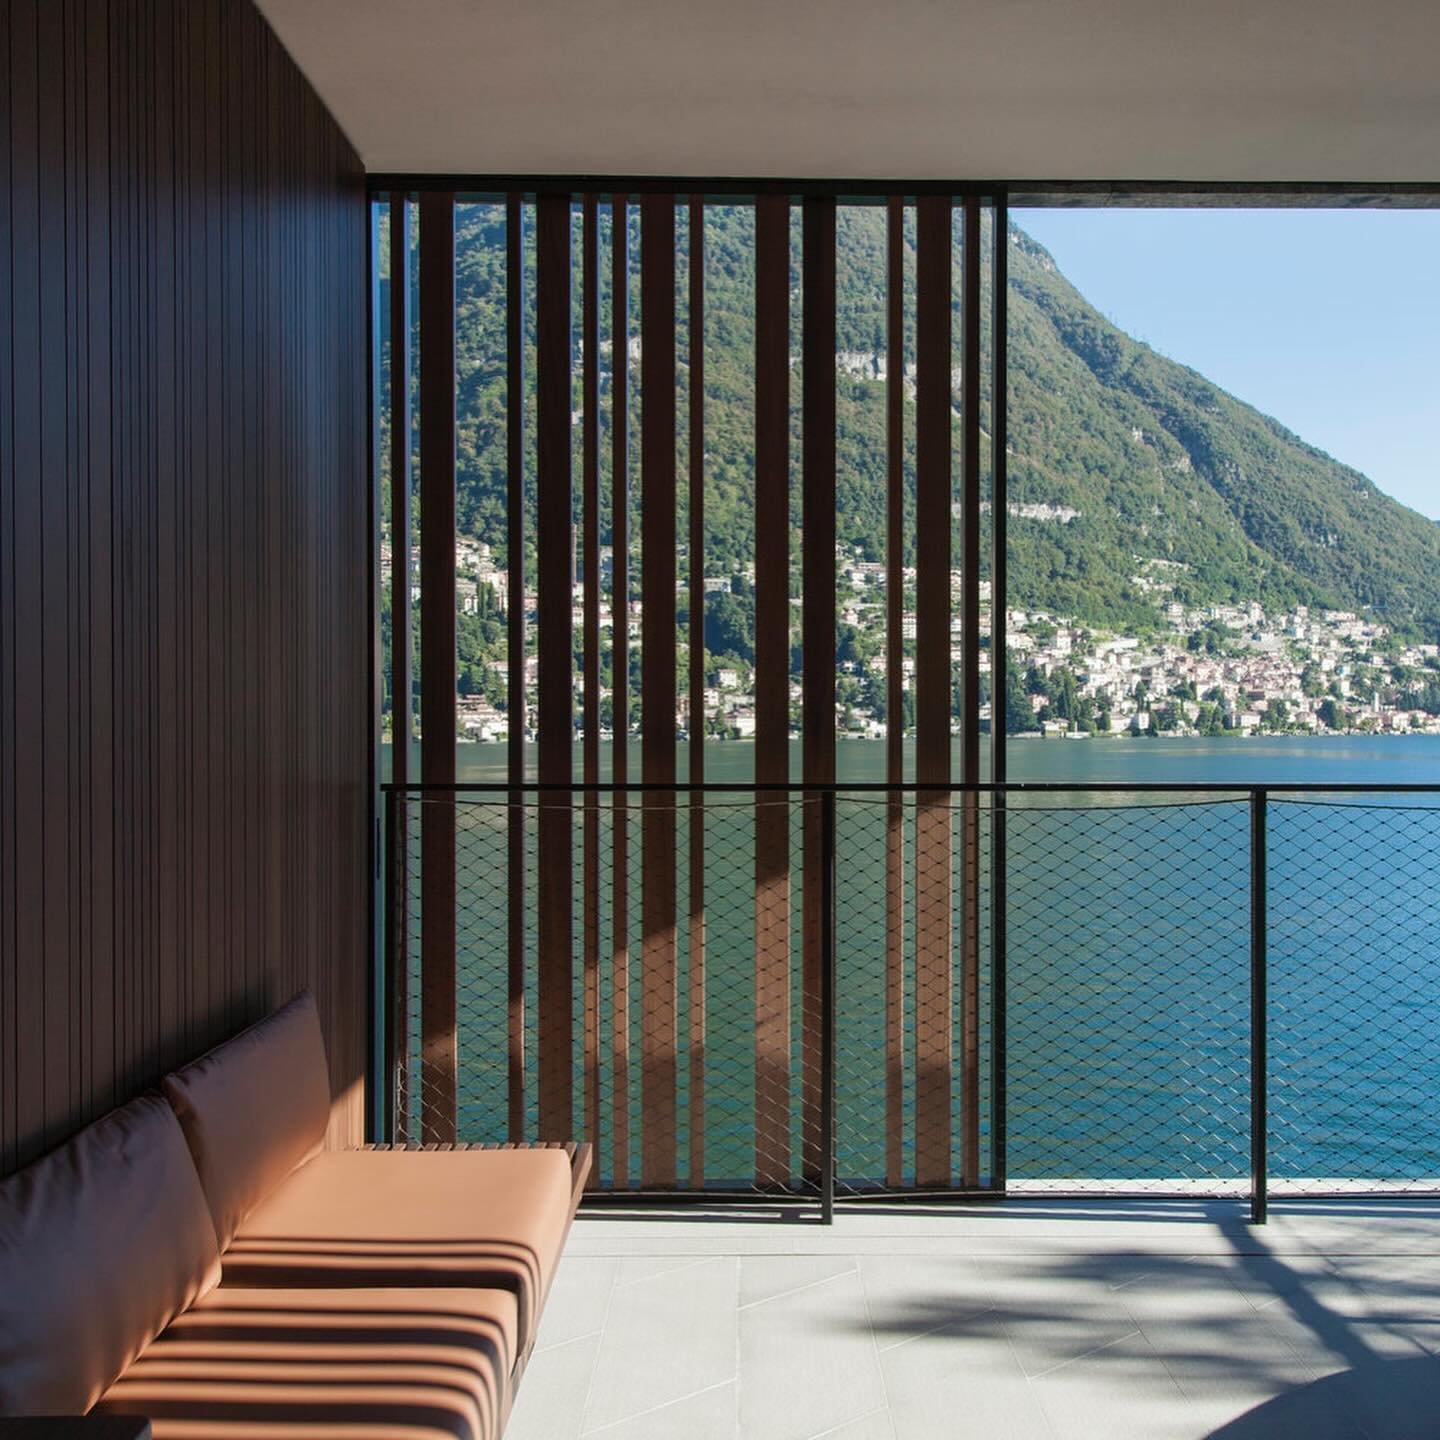 Il Sereno is a modern boutique hotel, located on the banks of Lake Como in Italy. Surrounded by picturesque mountains and dark teal water, the intimate hotel brings fresh contemporary luxury to the area. The design is inspired by Lake Como&rsquo;s hi